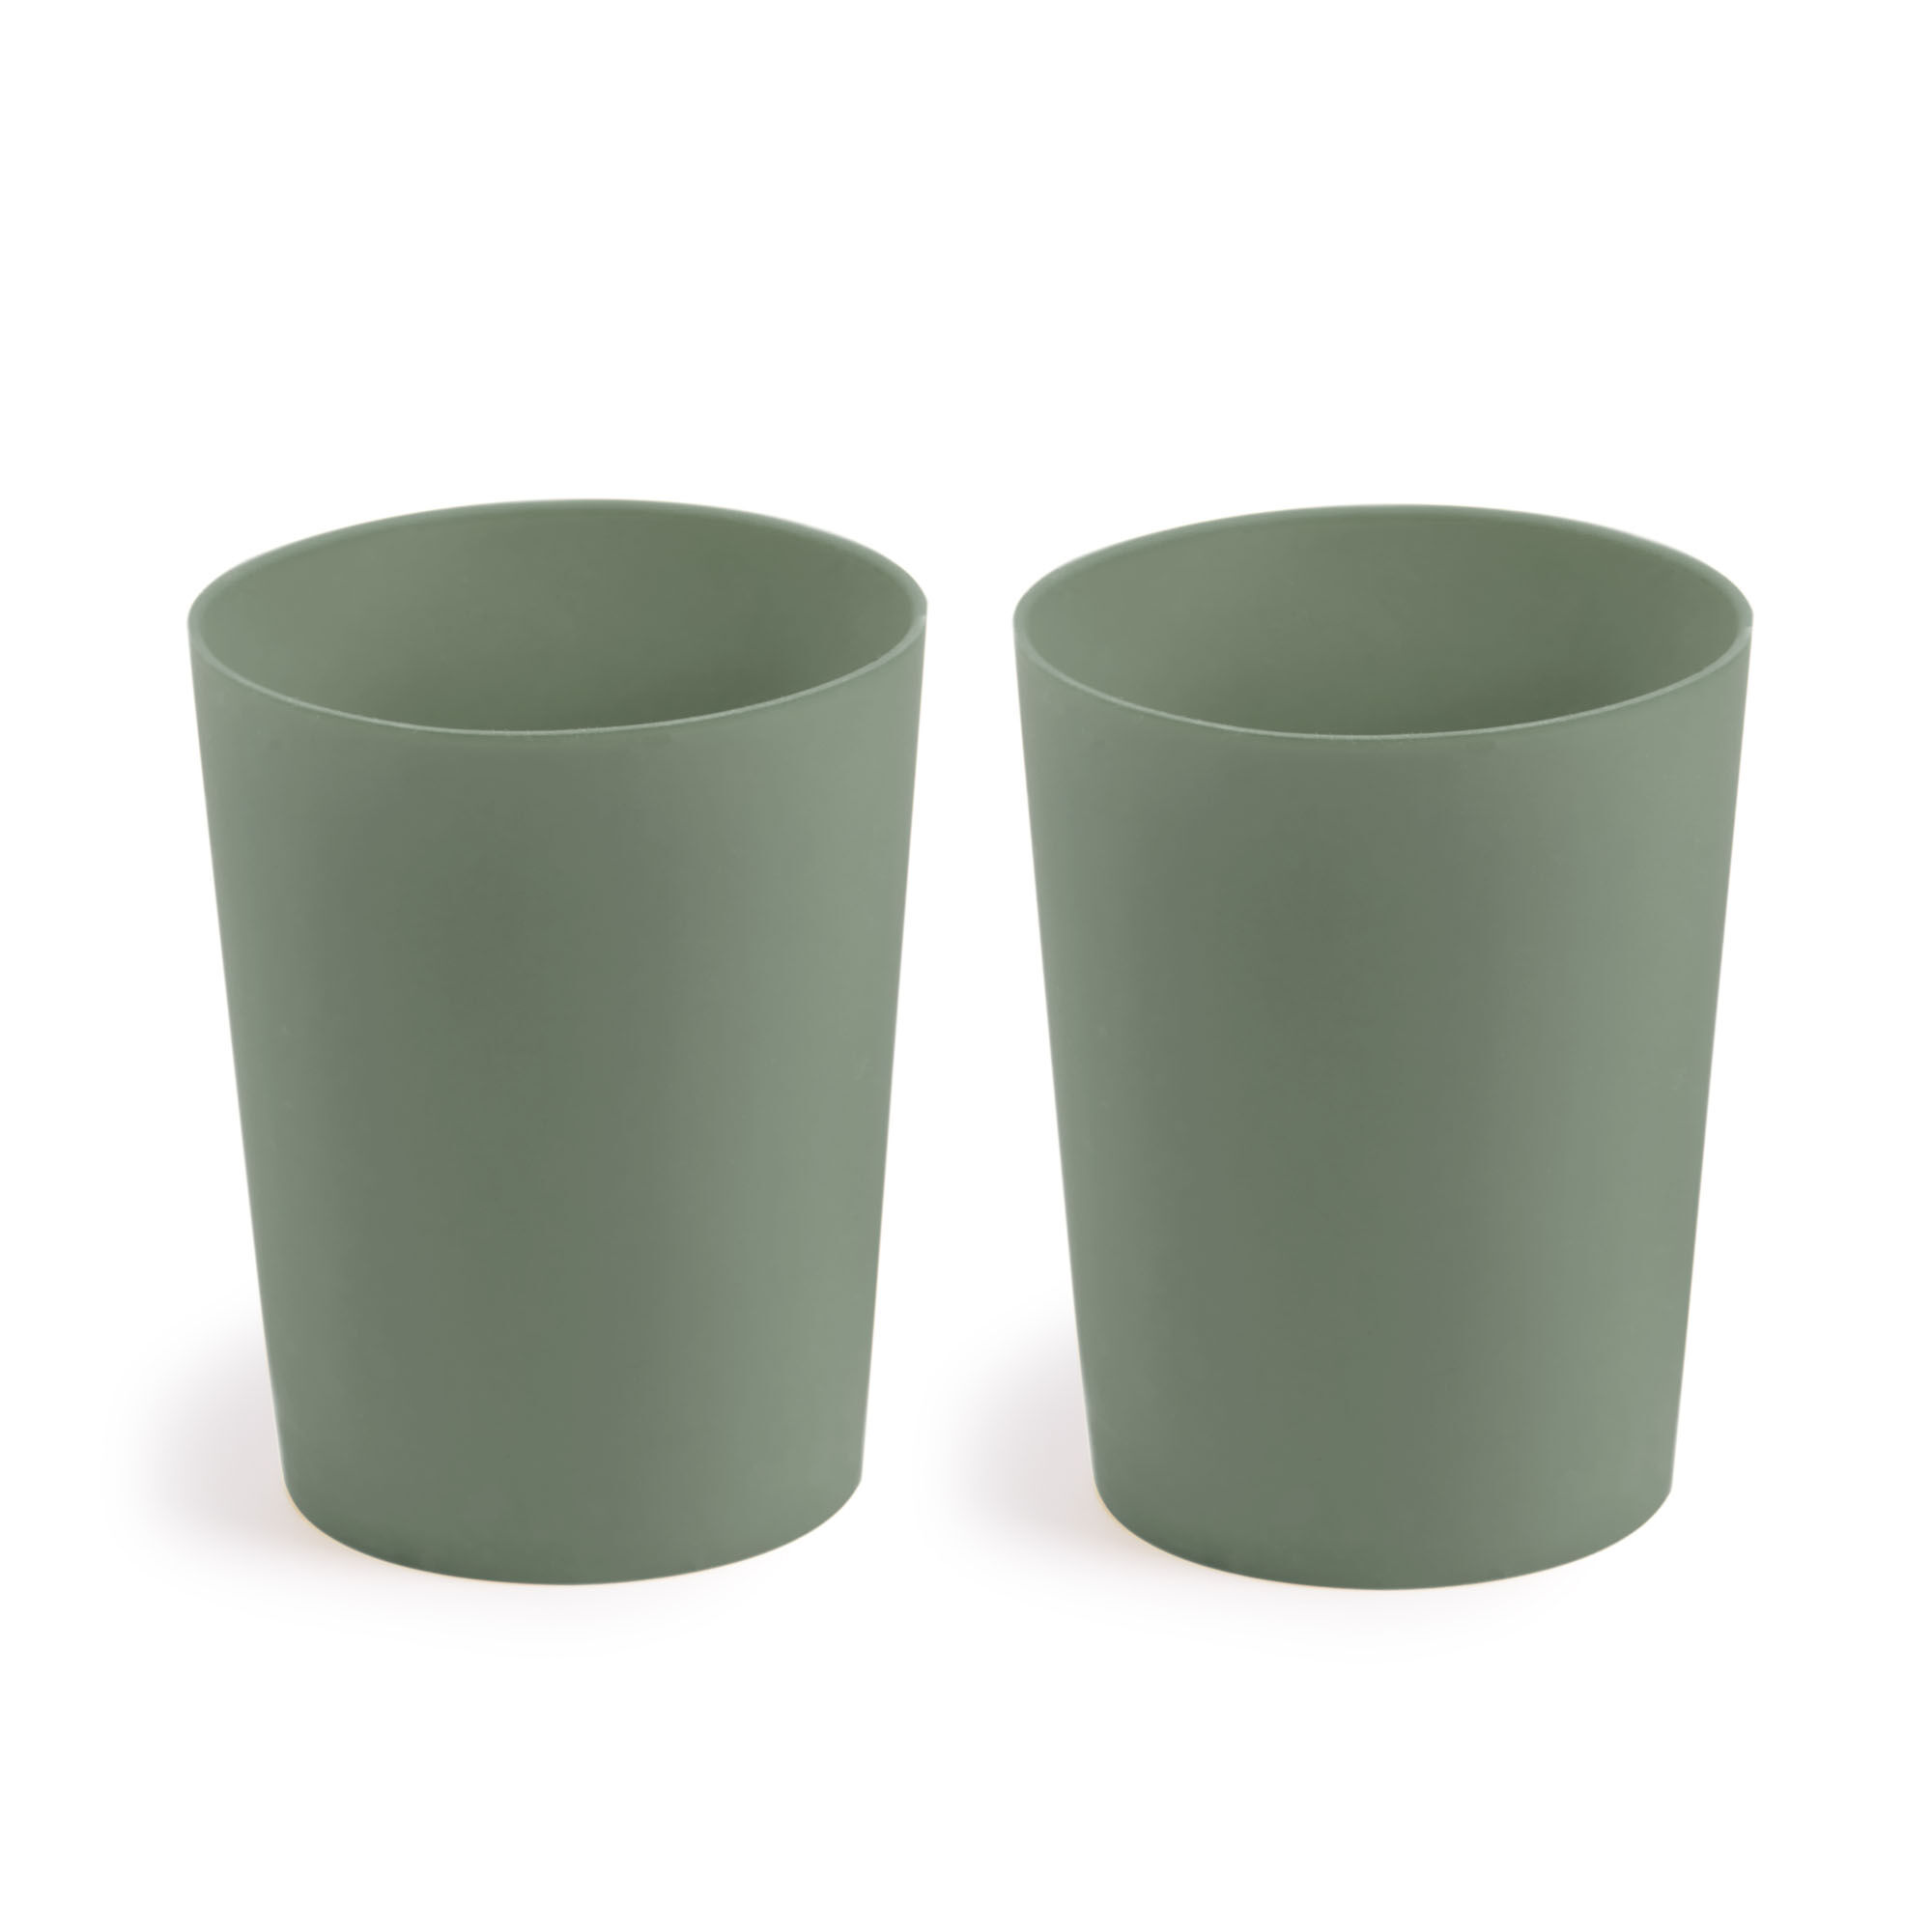 Kave Home Epiphany set of 2 cups in green silicone